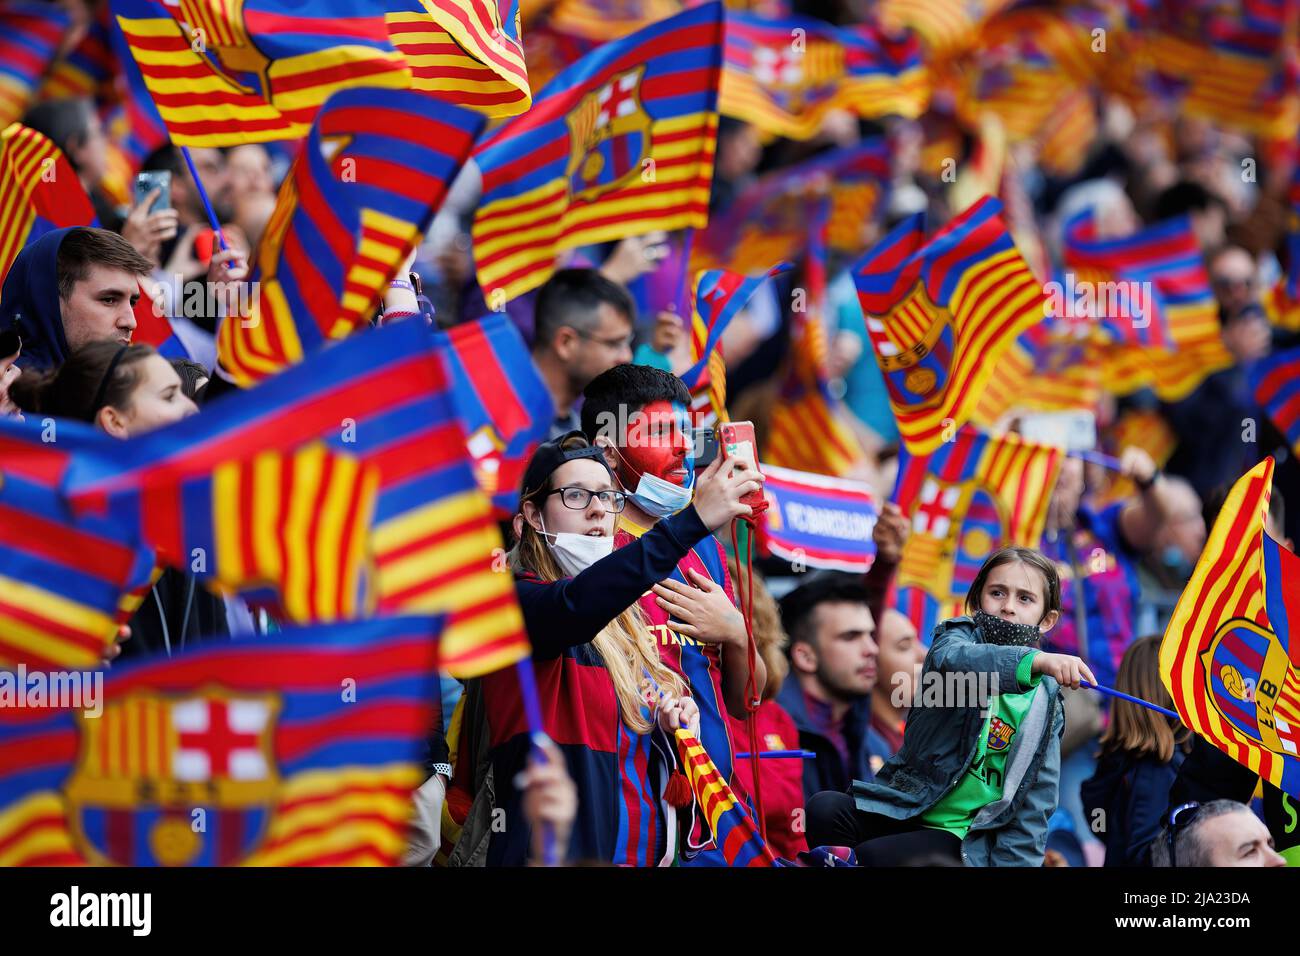 BARCELONA - APR 22: Fans waving flags during the UEFA Women's Champions League match between FC Barcelona and VfL Wolfsburg at the Camp Nou Stadium on Stock Photo